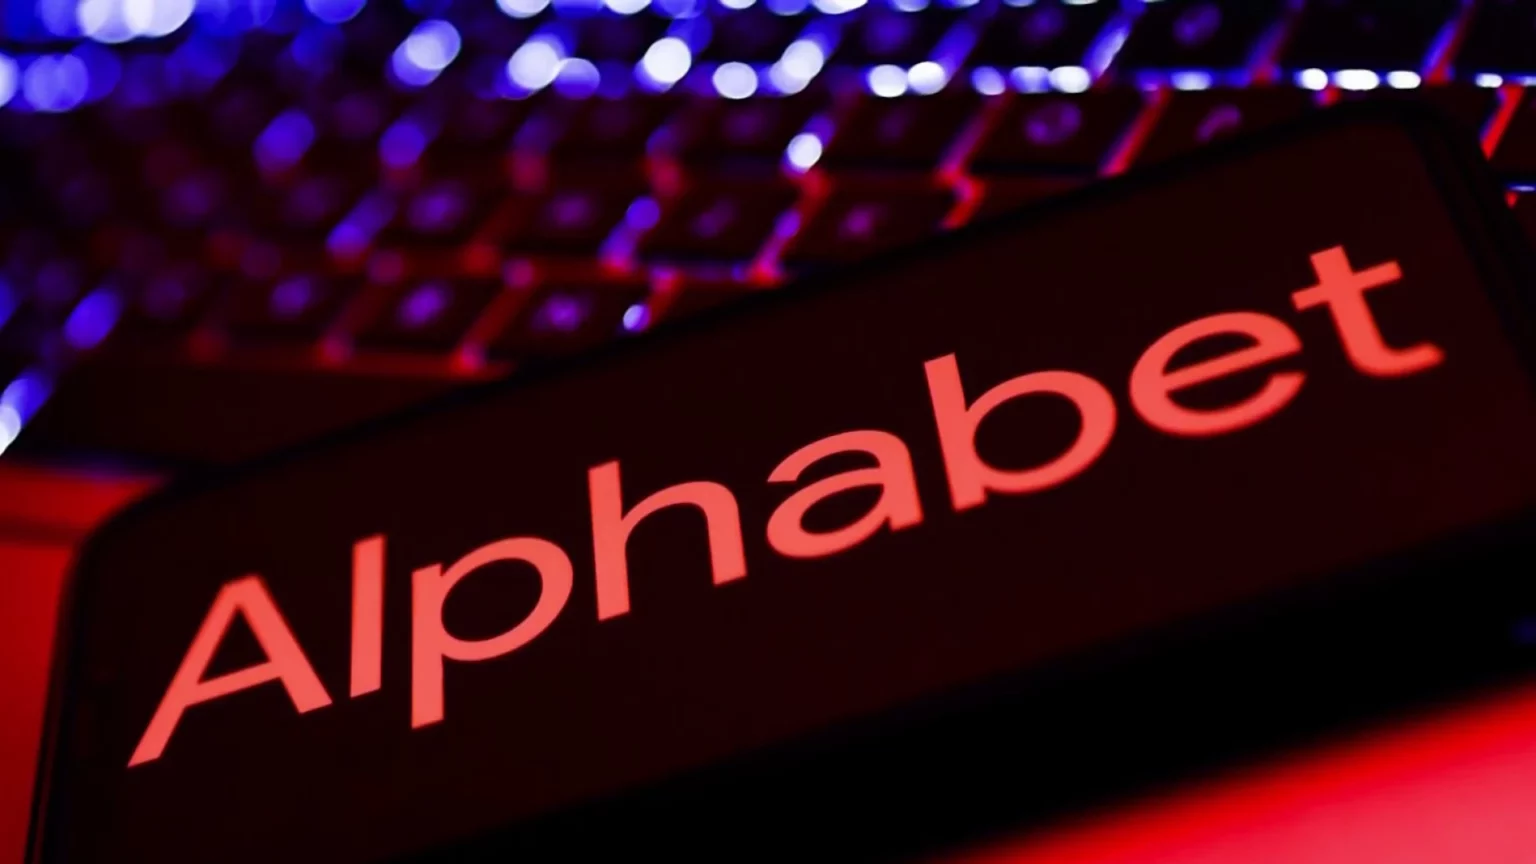 alphabet-reaches-700-million-deal-with-us-states-in-google-play-feud